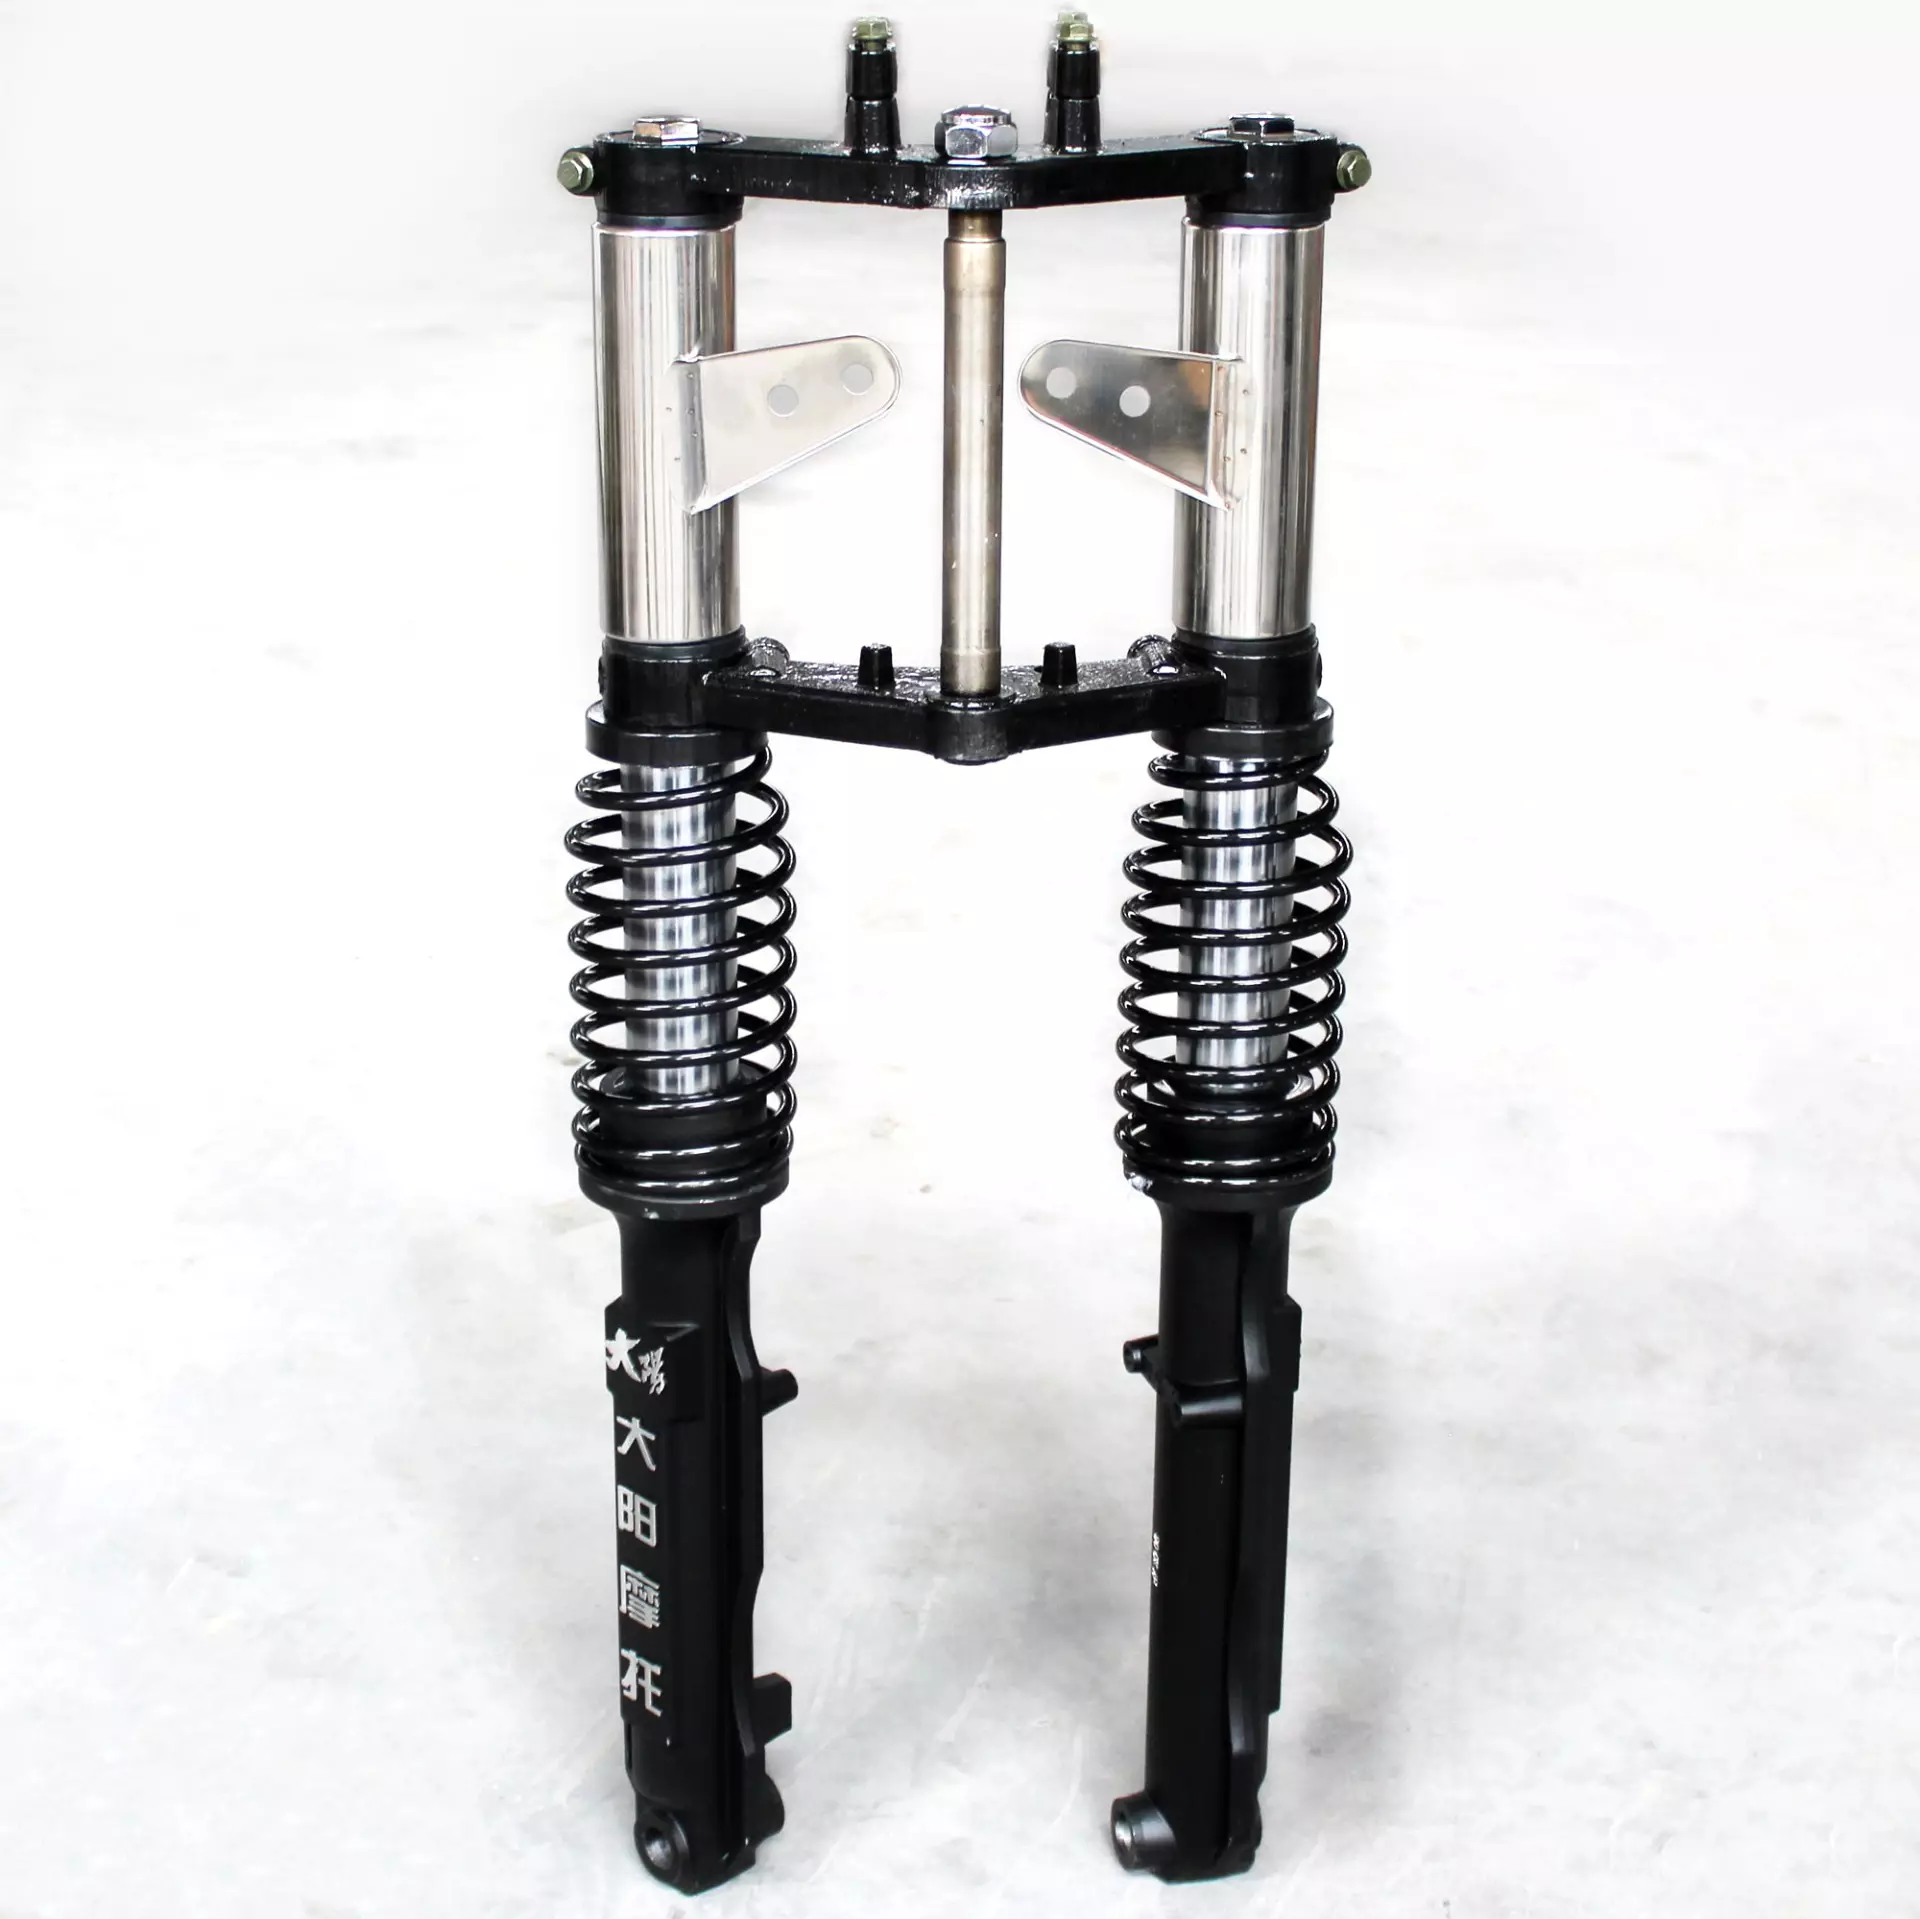 DAYANG Gokuu cargo tricycle  front binocular shock absorber factory direct sale motorcycle hydraulic shock absorber high quality